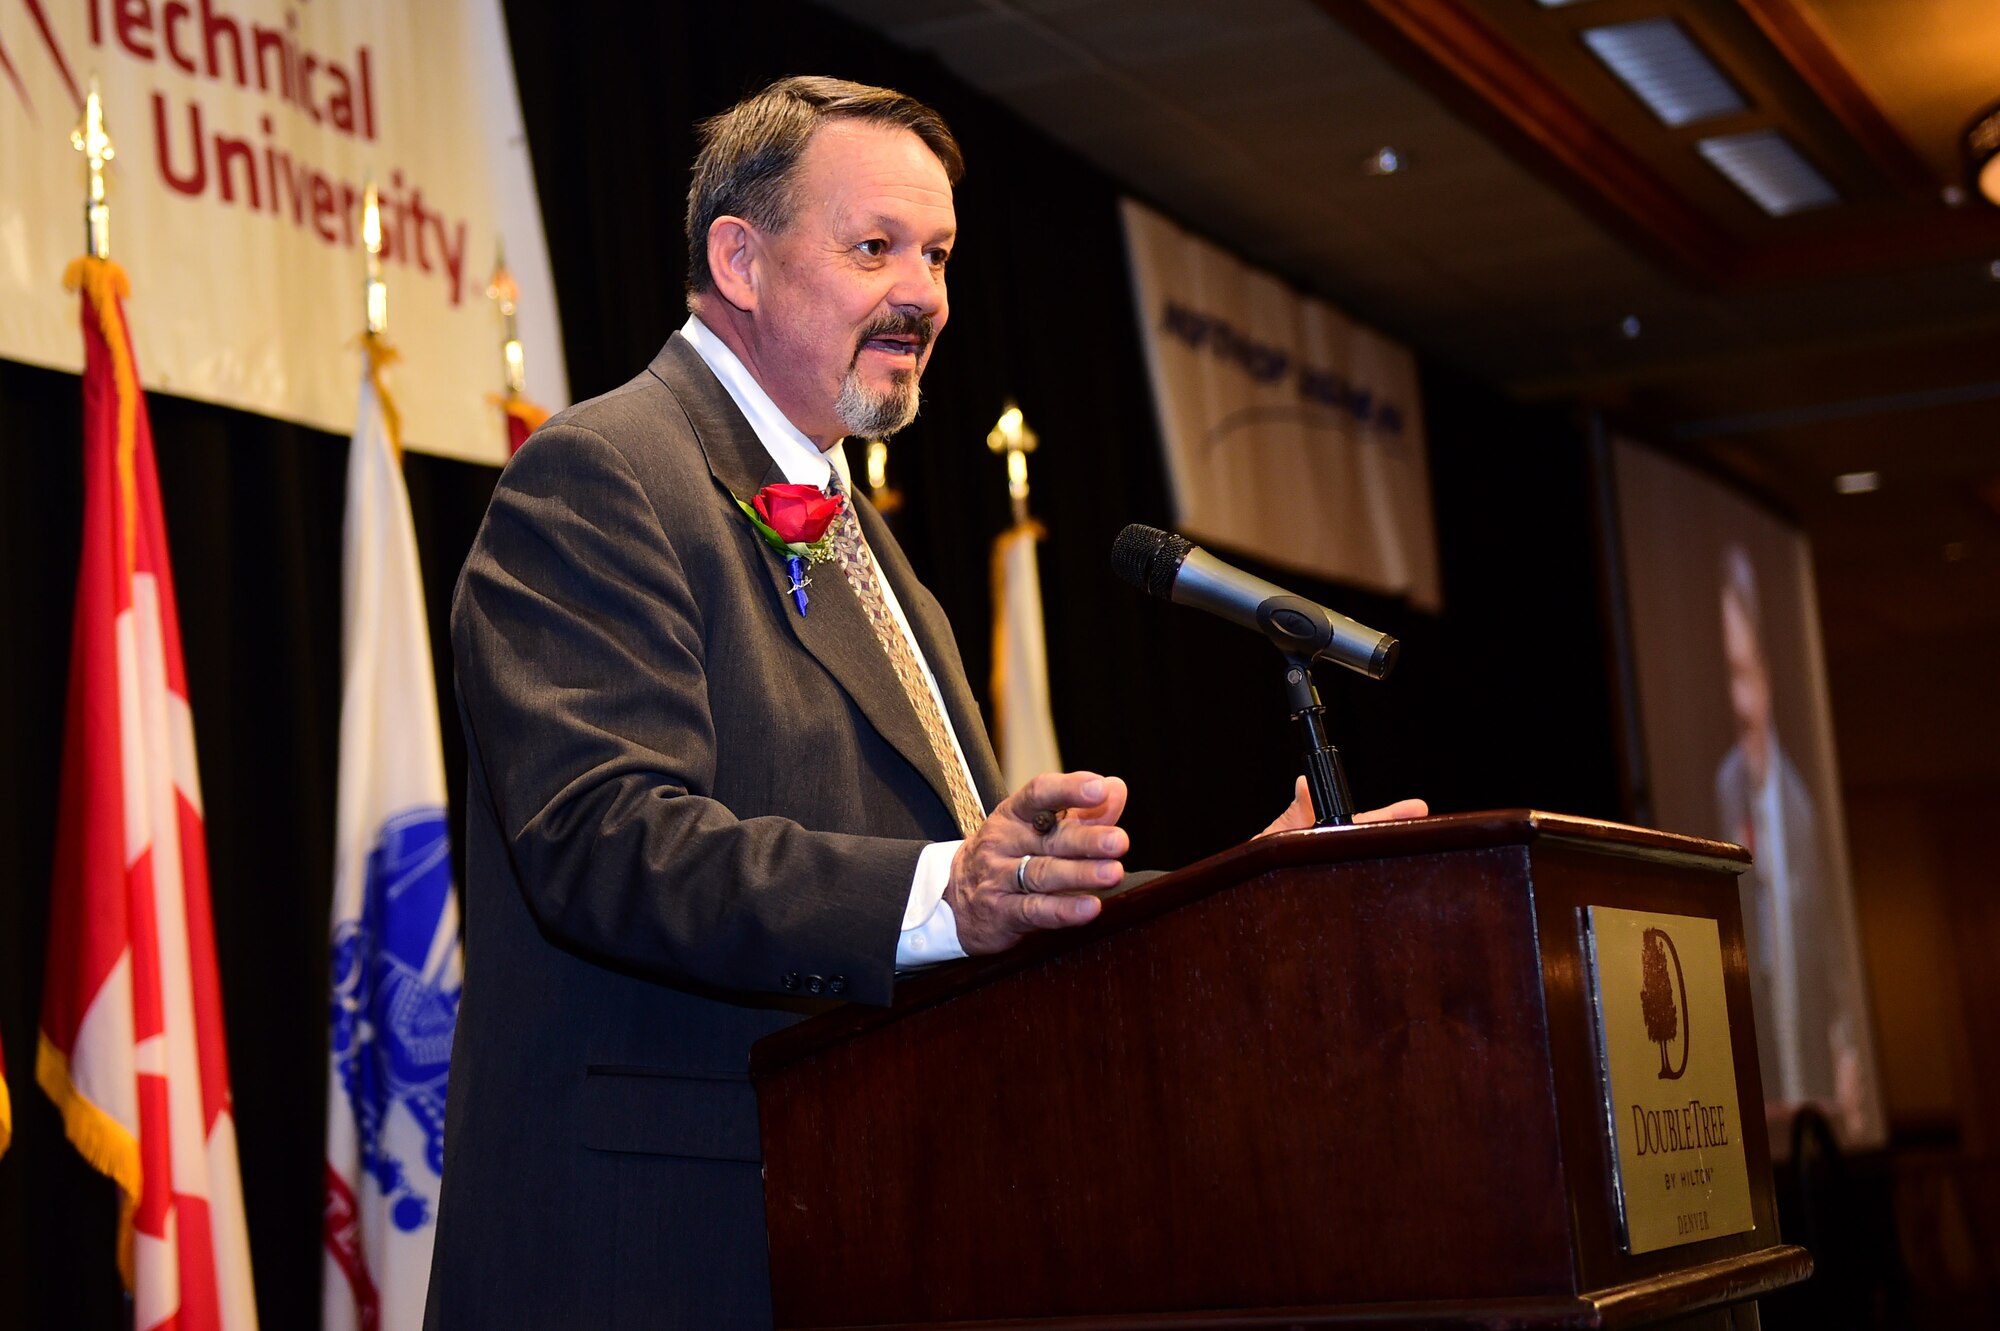 Rick Crandell, master of ceremonies, speaks May 13, 2016, during the Armed Forces Recognition Luncheon at the Doubletree Stapleton Hotel in Denver. The luncheon recognized outstanding Service members from all branches of service including active duty, guard and reserve components. (U.S. Air Force photo by Airman 1st Class Gabrielle Spradling/Released)